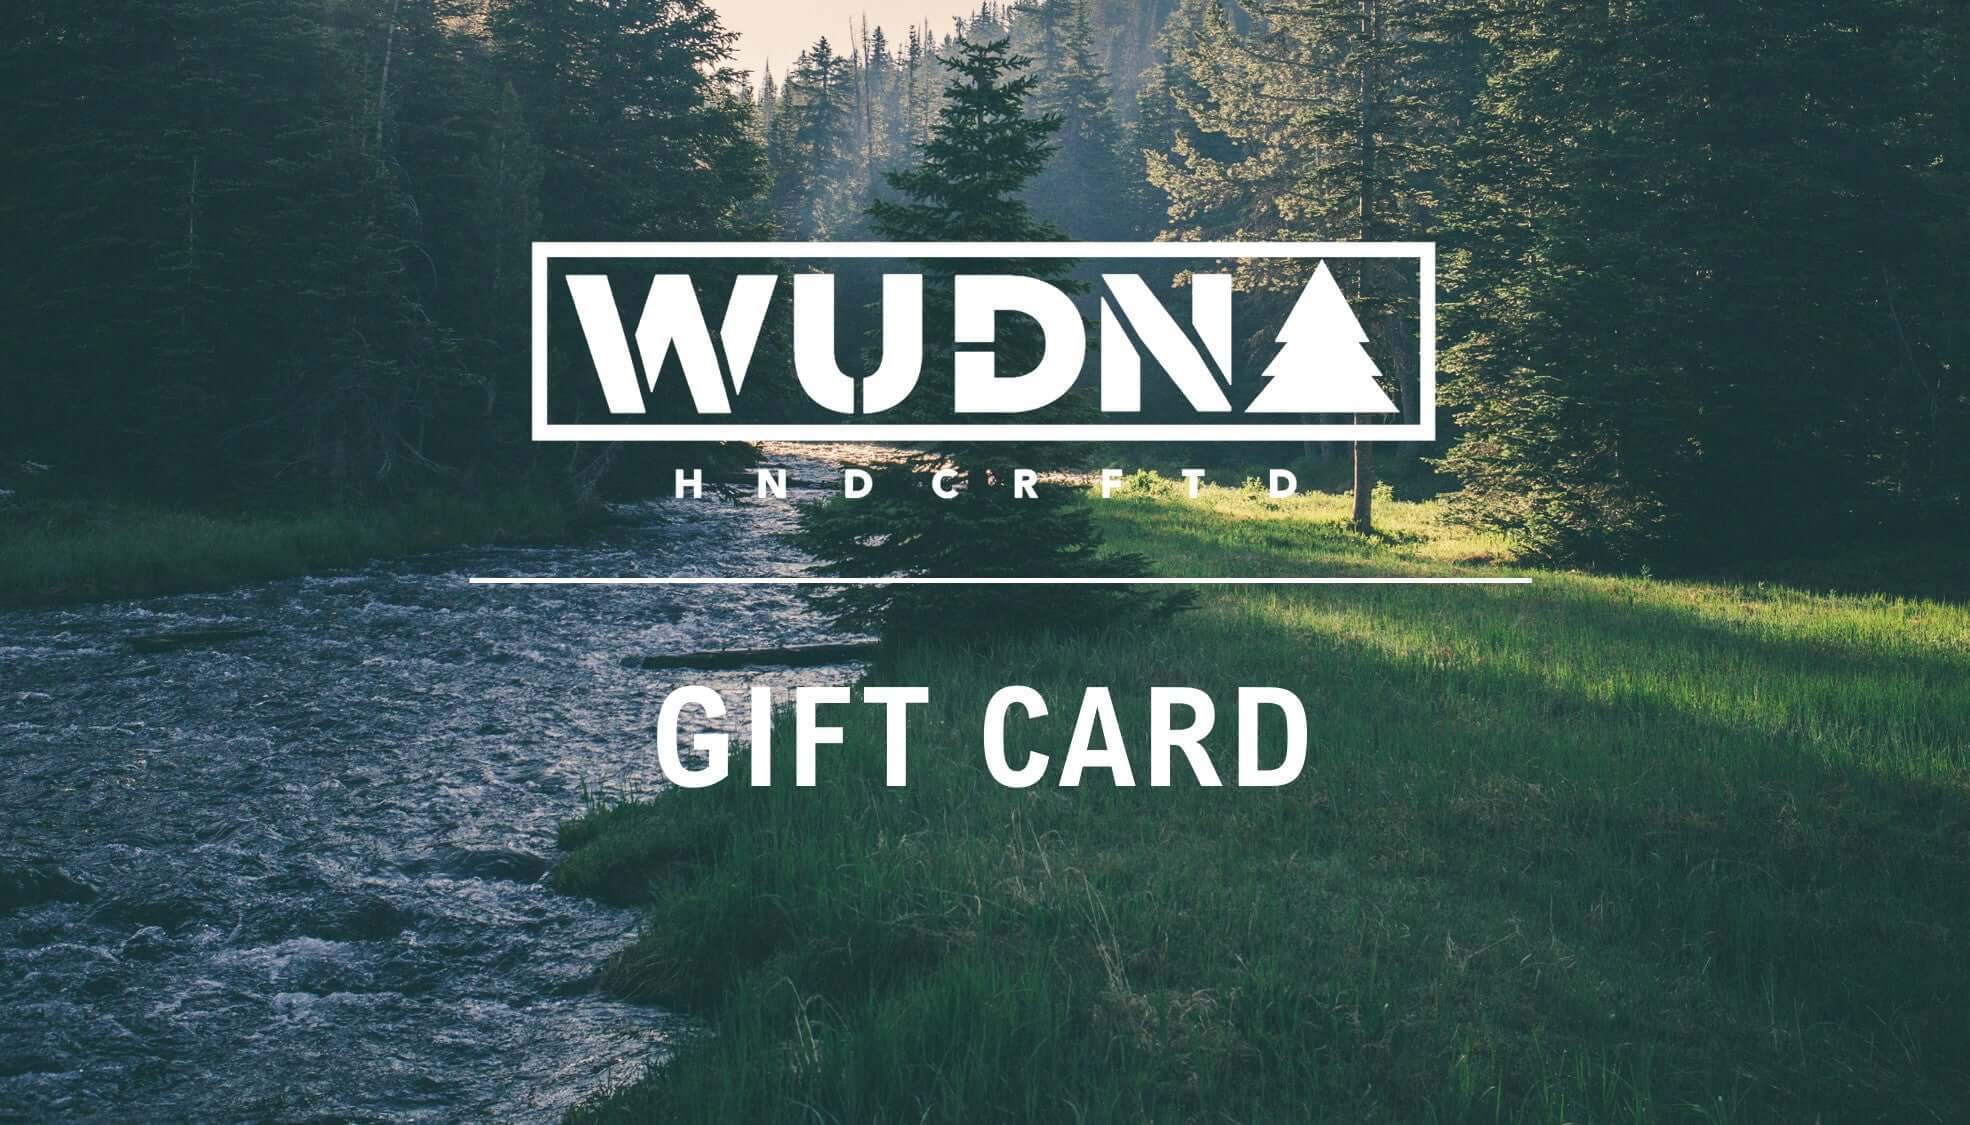 Father's Day Gift Card, Gift Card - WUDN